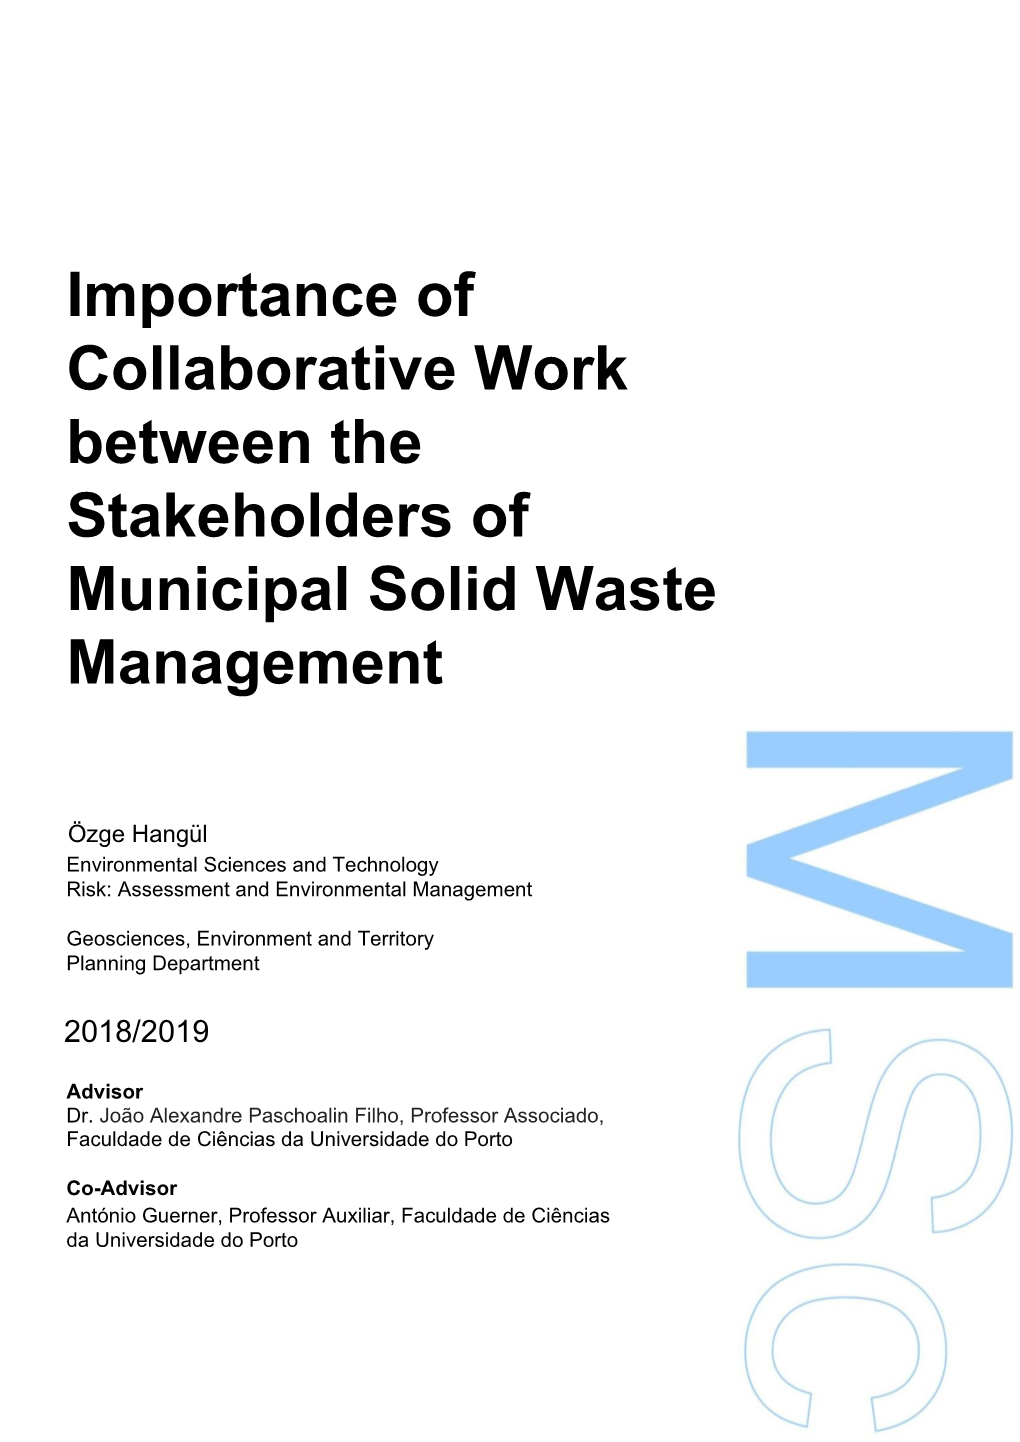 Importance of Collaborative Work Between the Stakeholders of Municipal Solid Waste Management